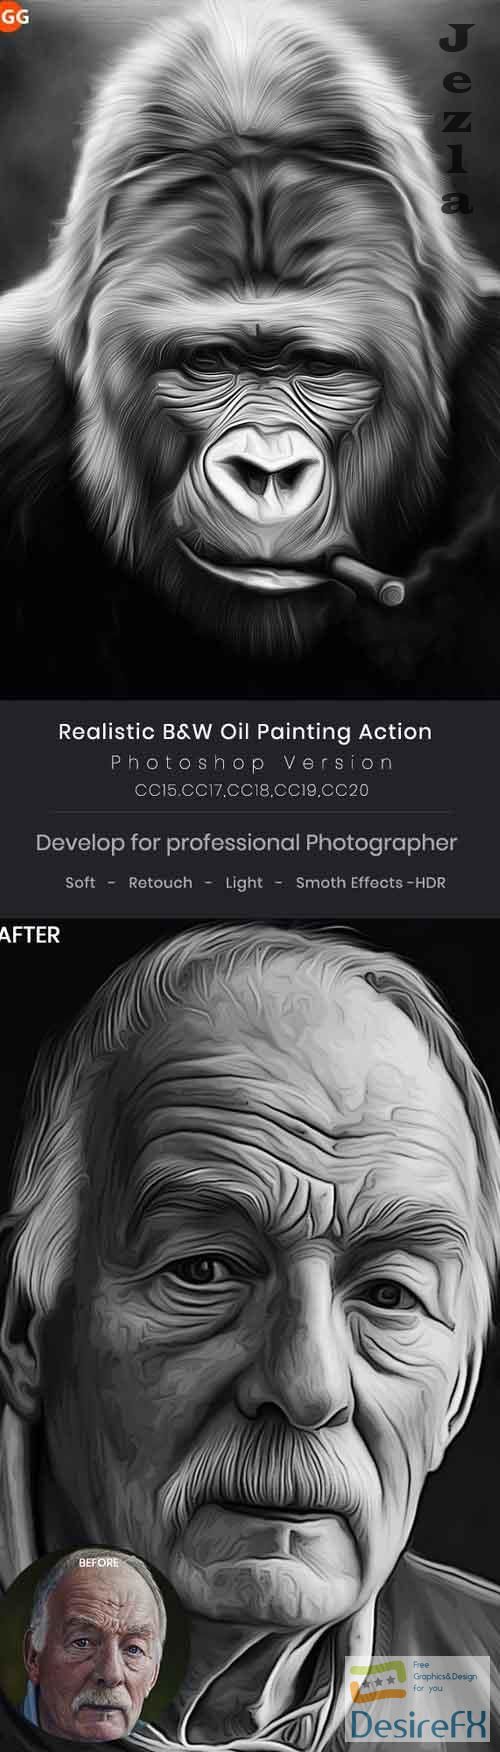 Realistic B&W Oil Painting Action 26326529